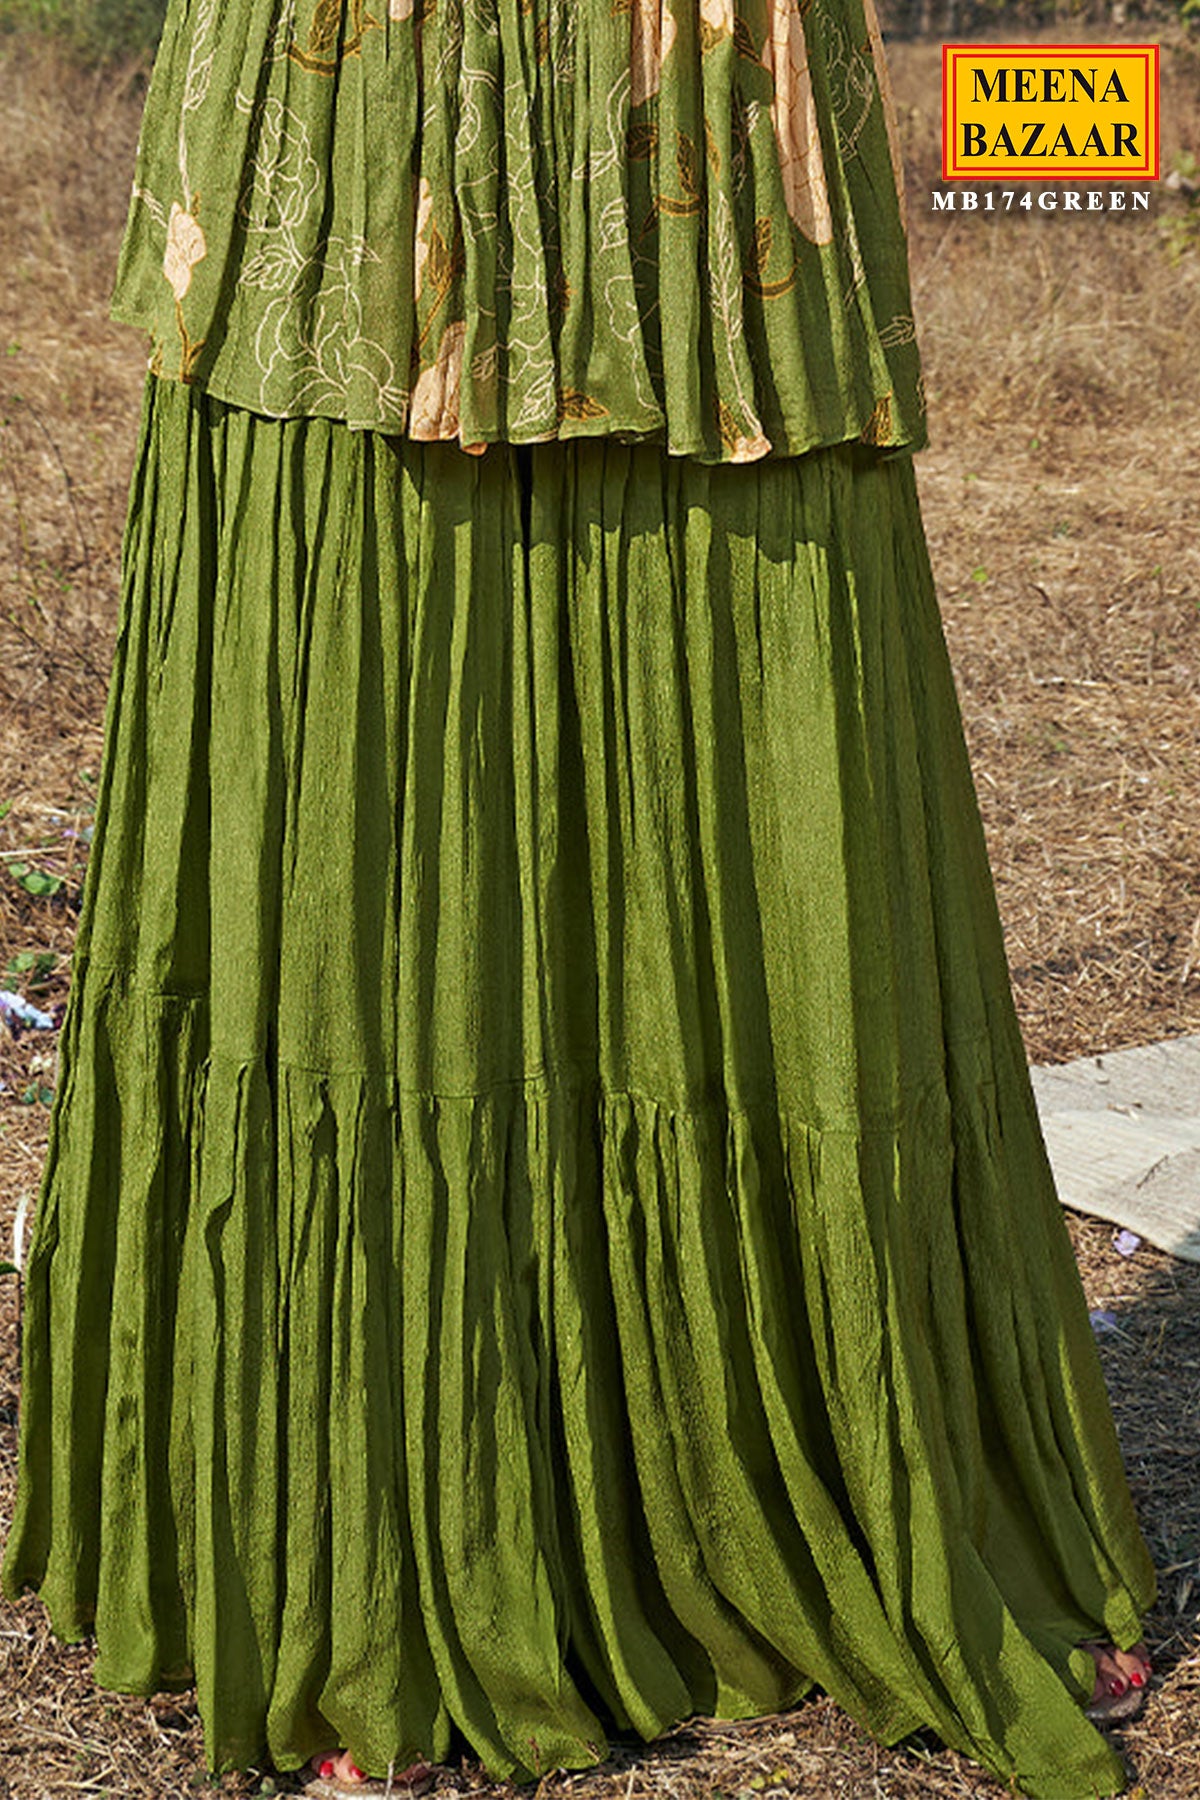 Green Floral Printed Pleated Kurti-Gharara Set with Beads, Cutdana, and Thread Embroidery